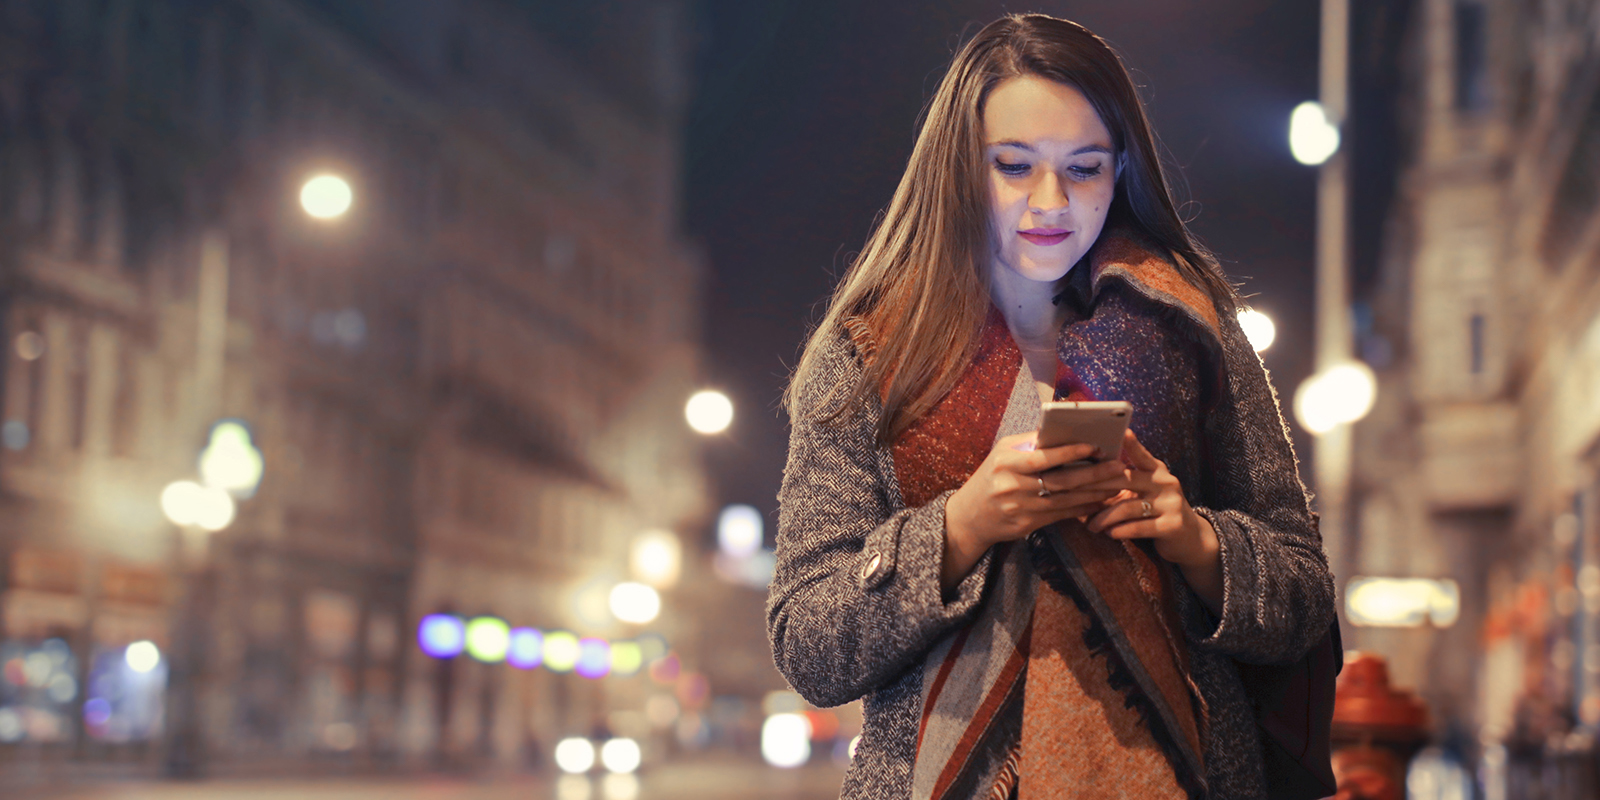 young woman walking down a well lit high street at night time, she'w wearing a winter coat and she's looking at the smartphone in her hand.